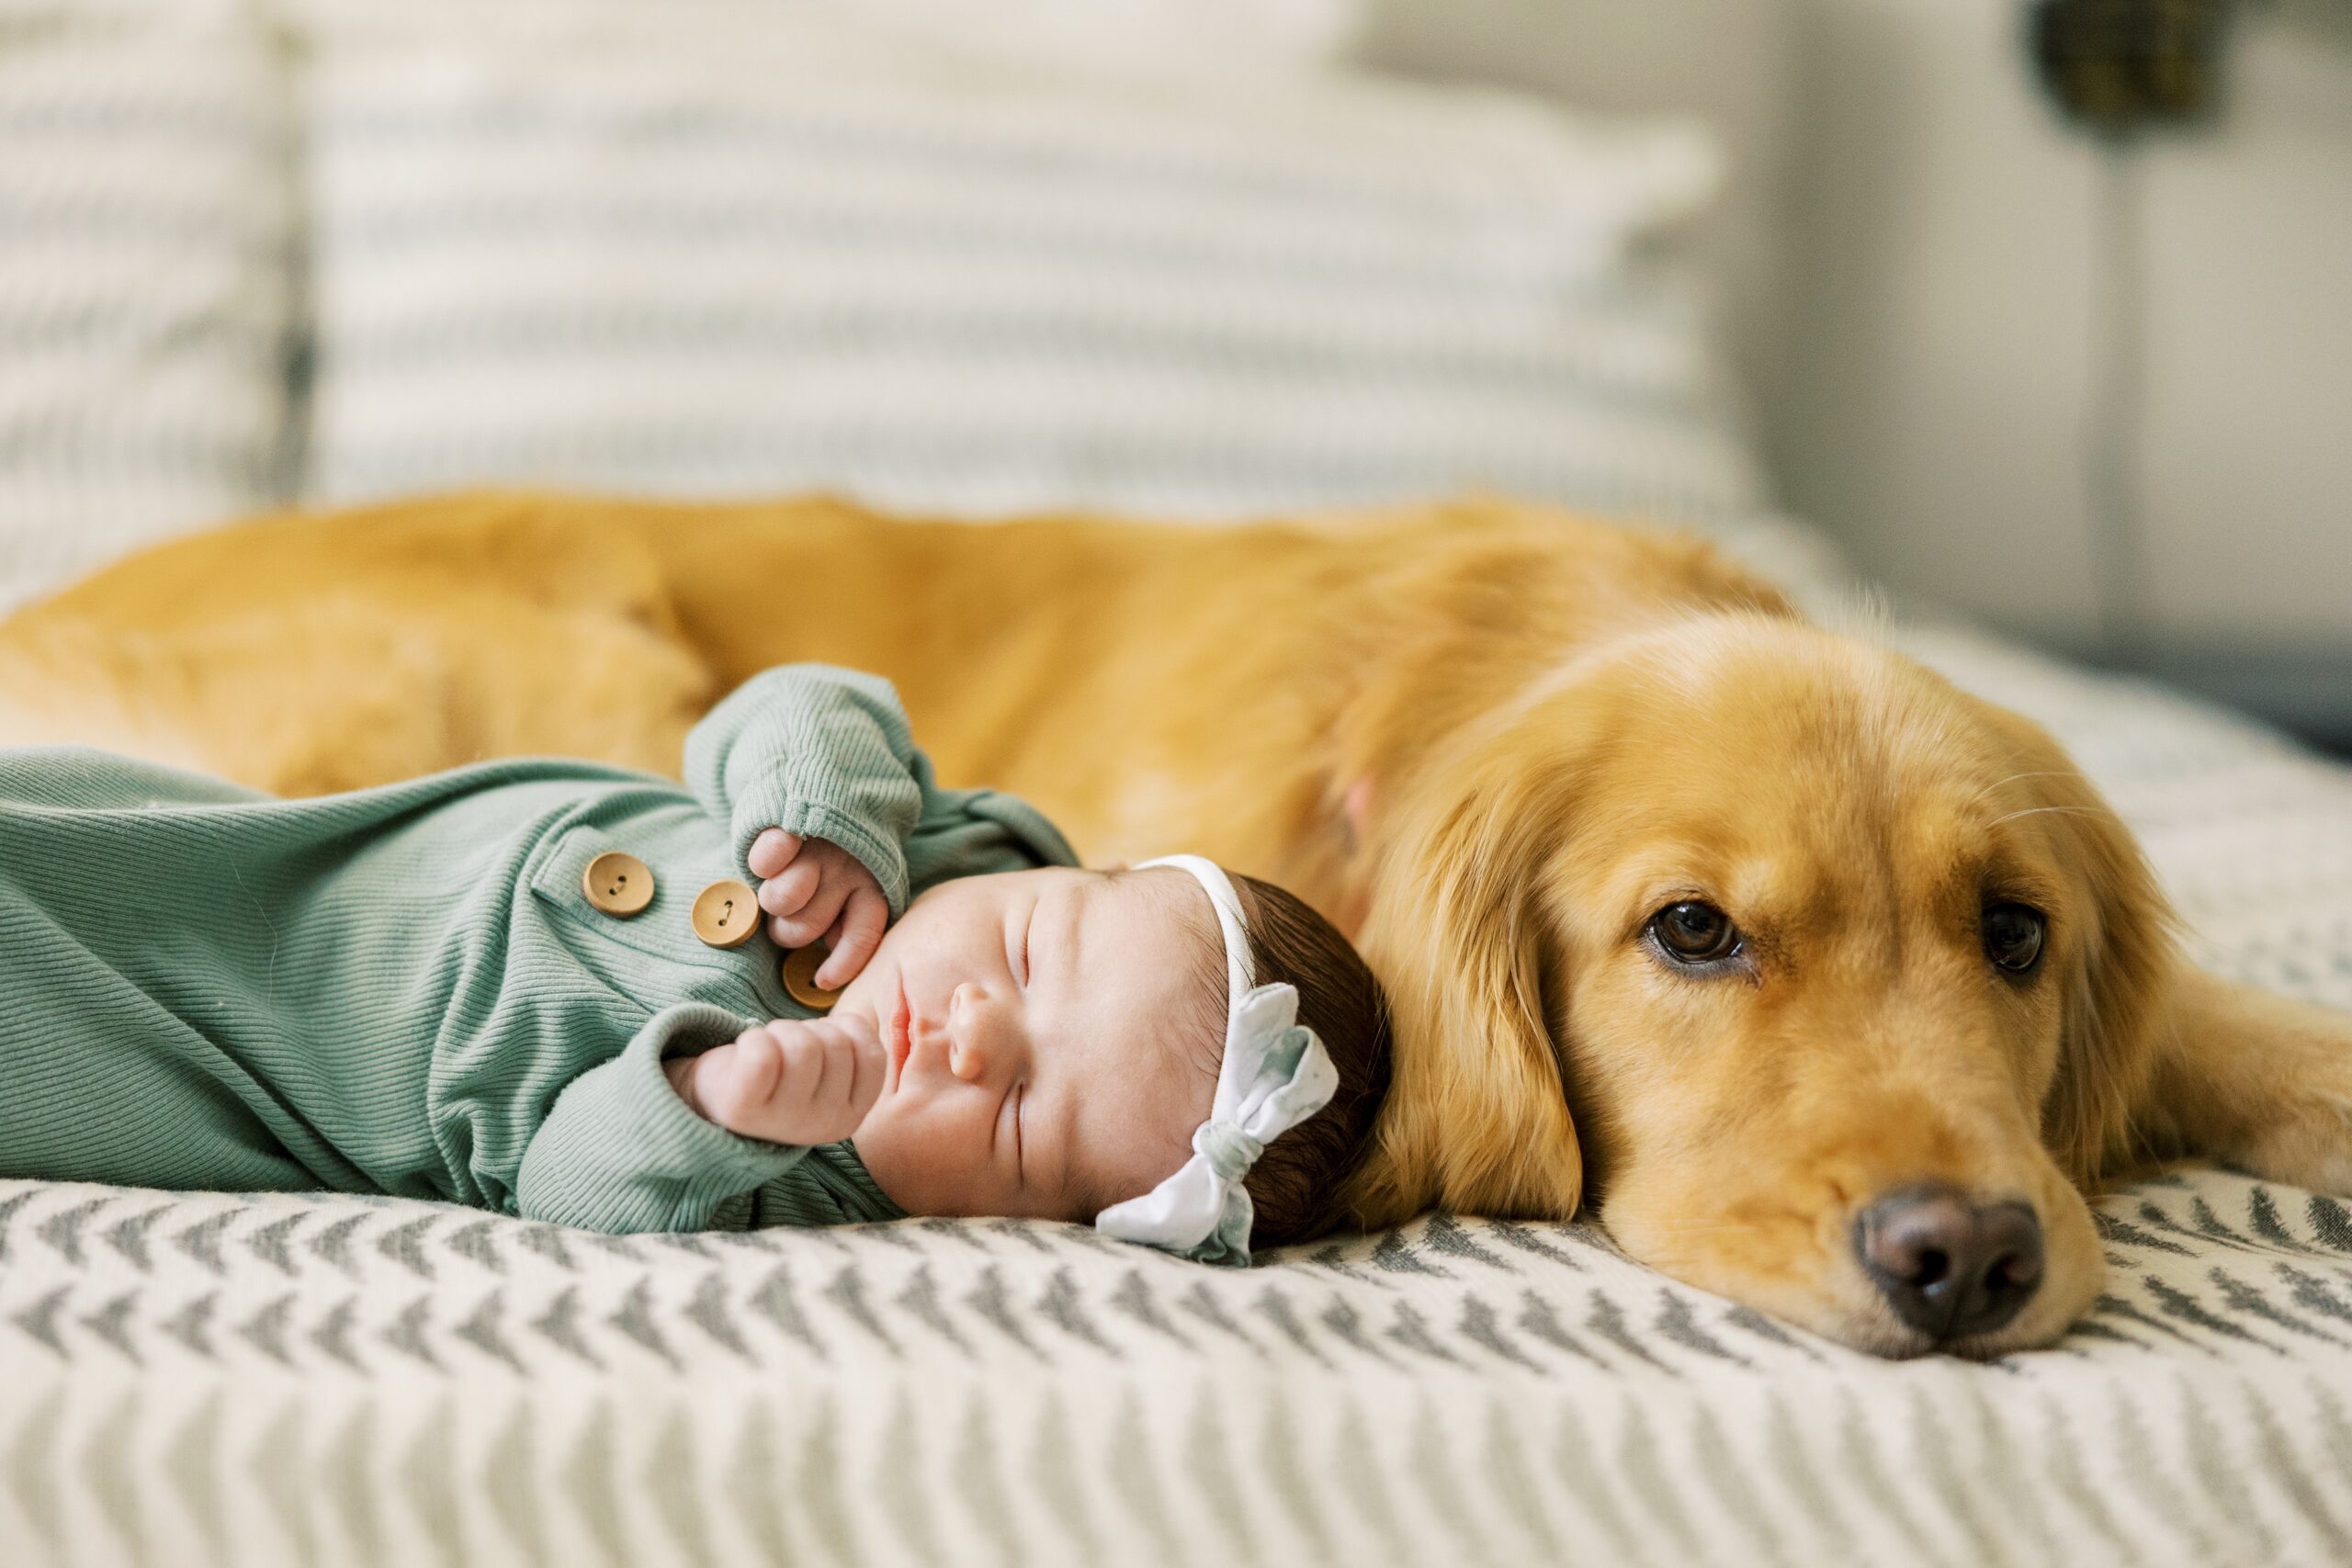 Newborn baby snuggles with Golden Retriever dog during at home newborn session